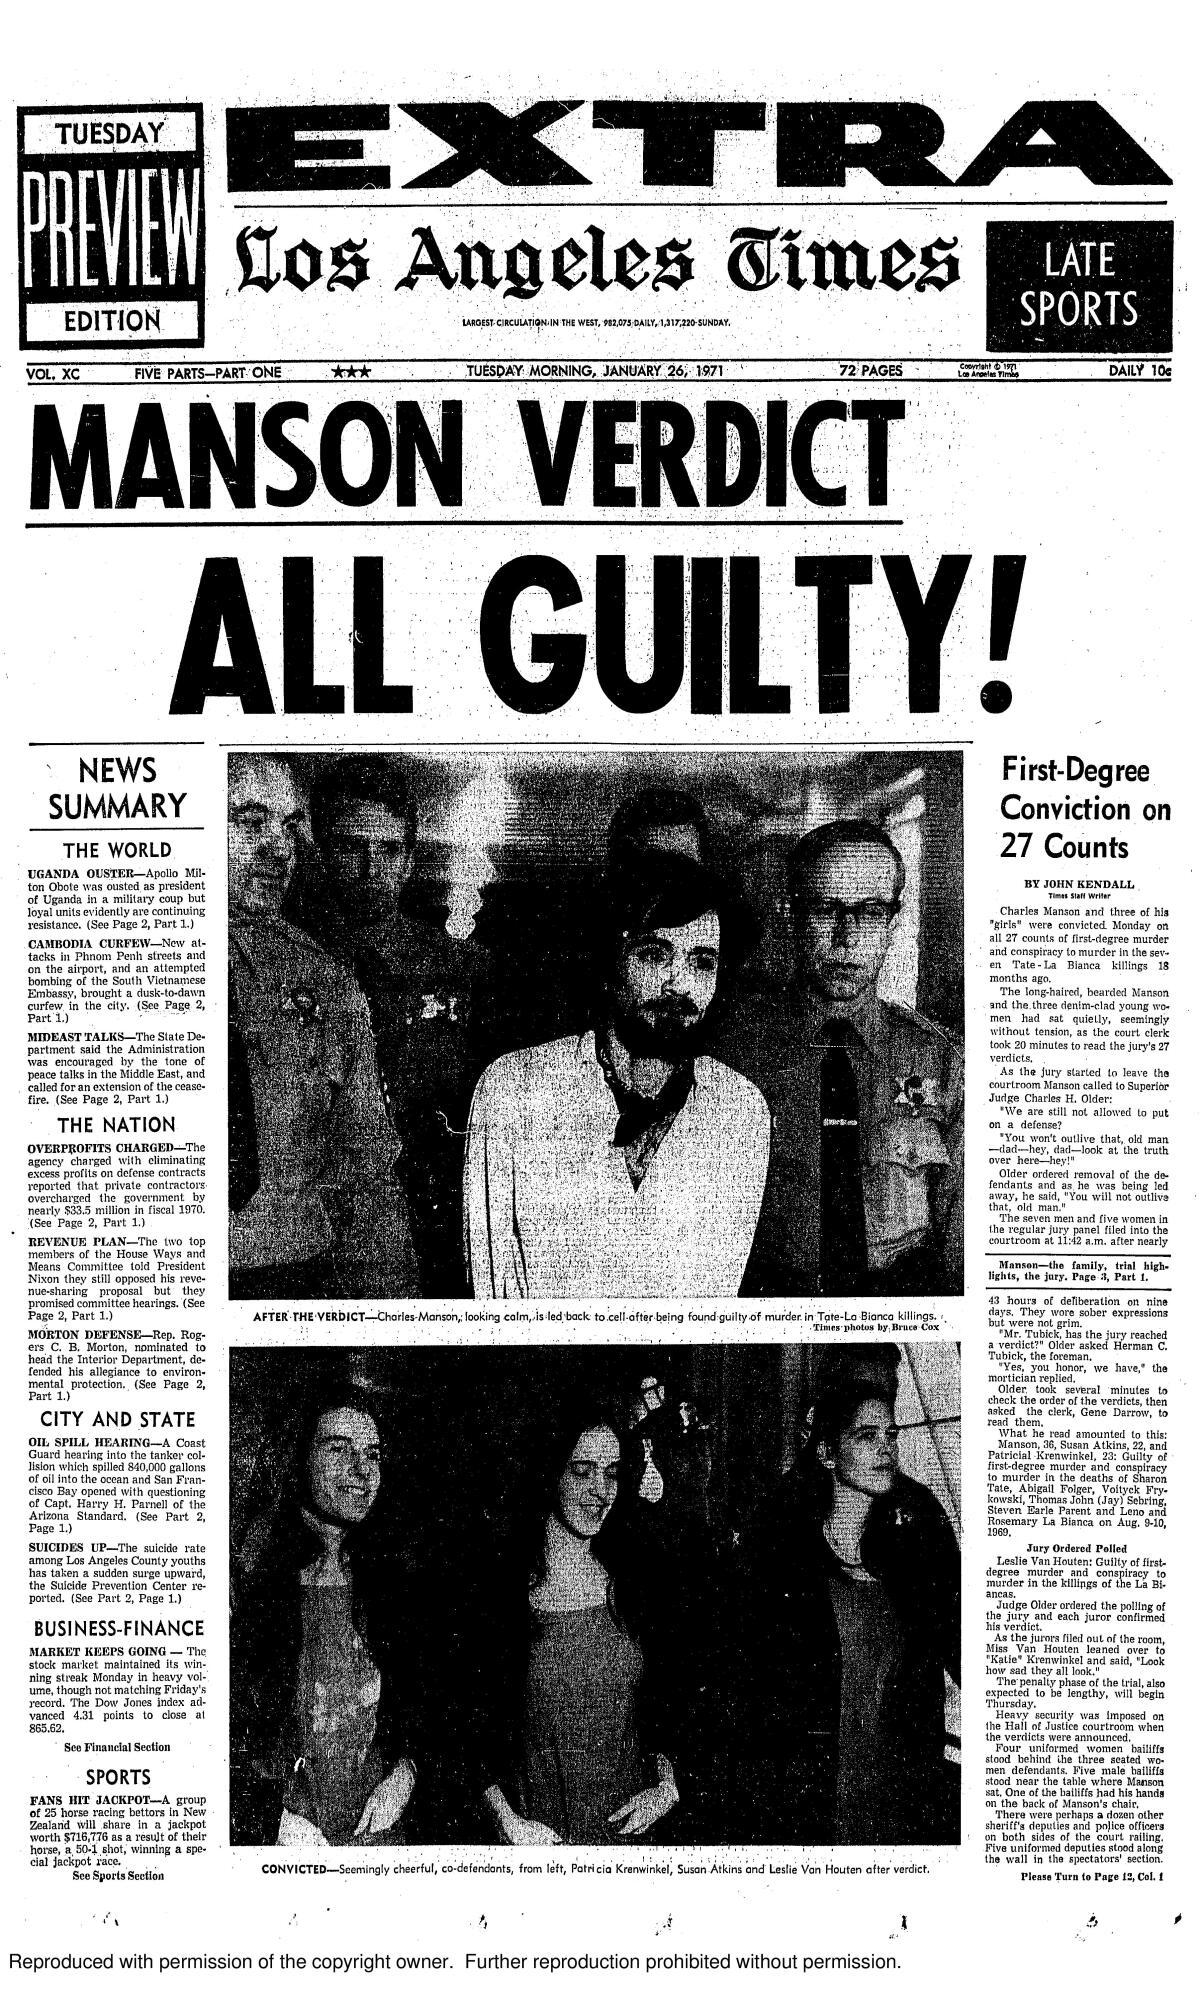 The front page of The Times with the headline "Manson verdict: All guilty"